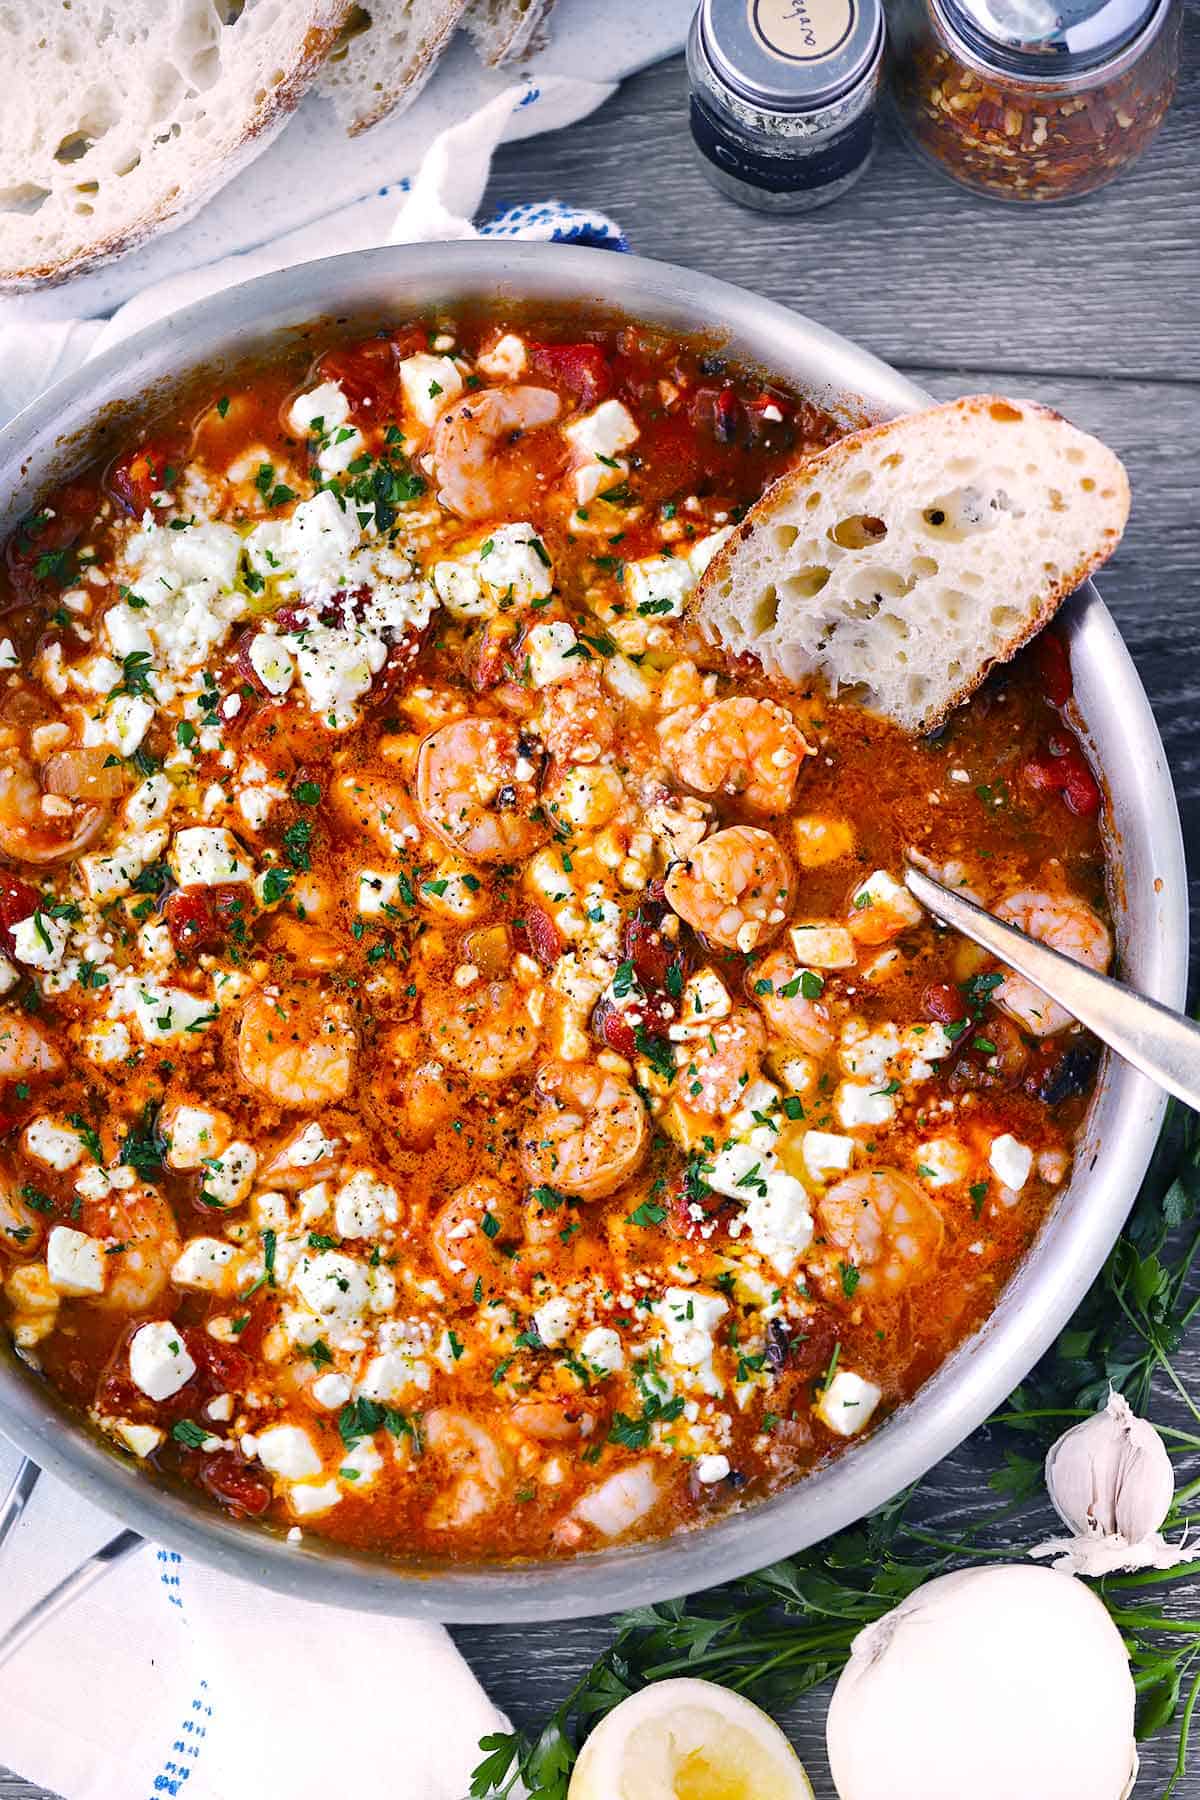 Garides saganaki, or Greek shrimp with feta and tomatoes, in a skillet with sourdough bread.